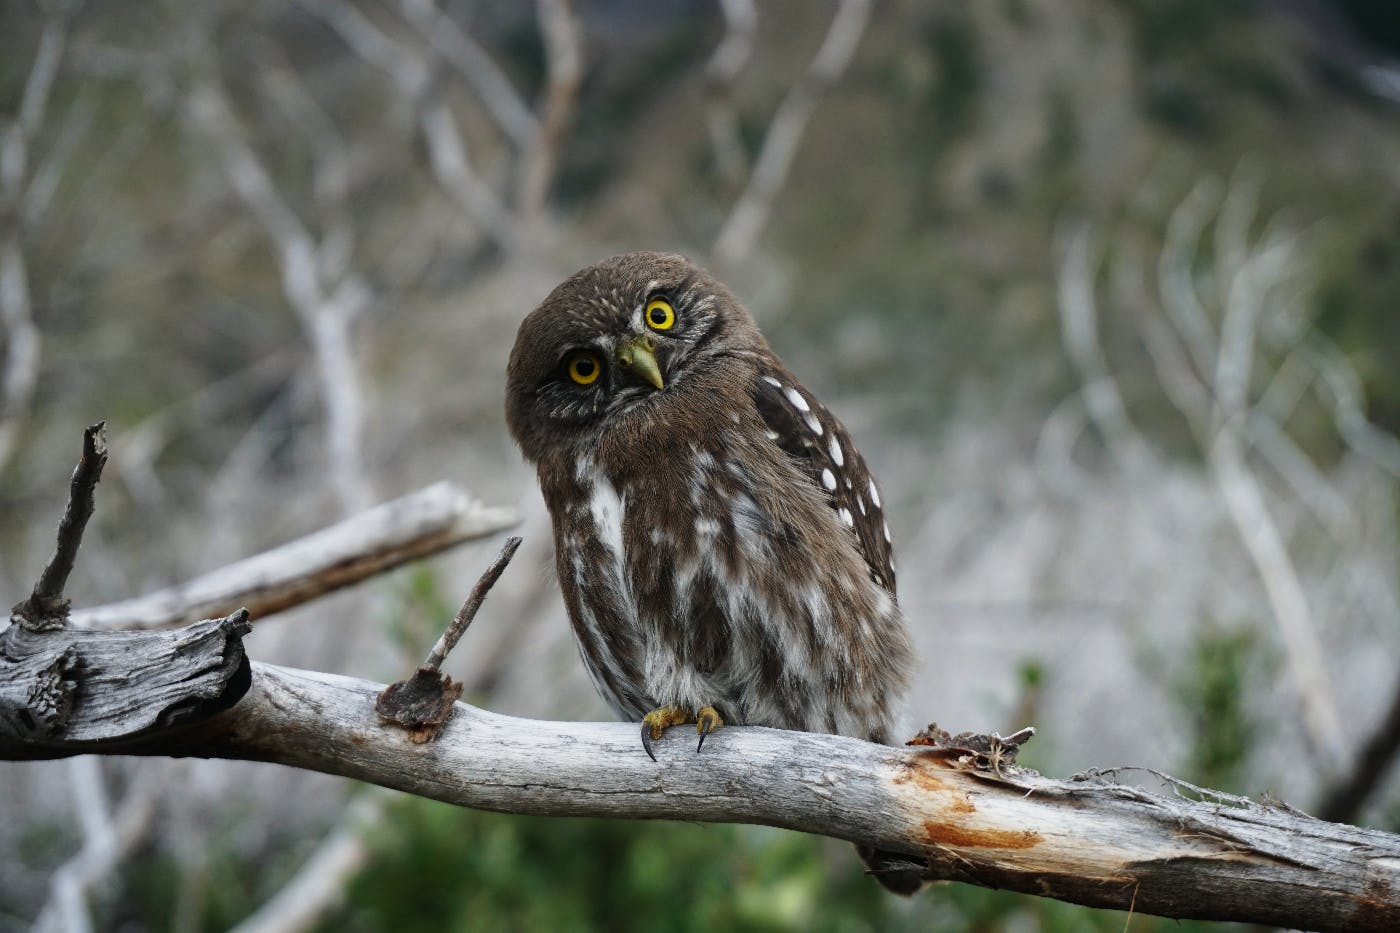 An owl on a branch with its head cocked to one side